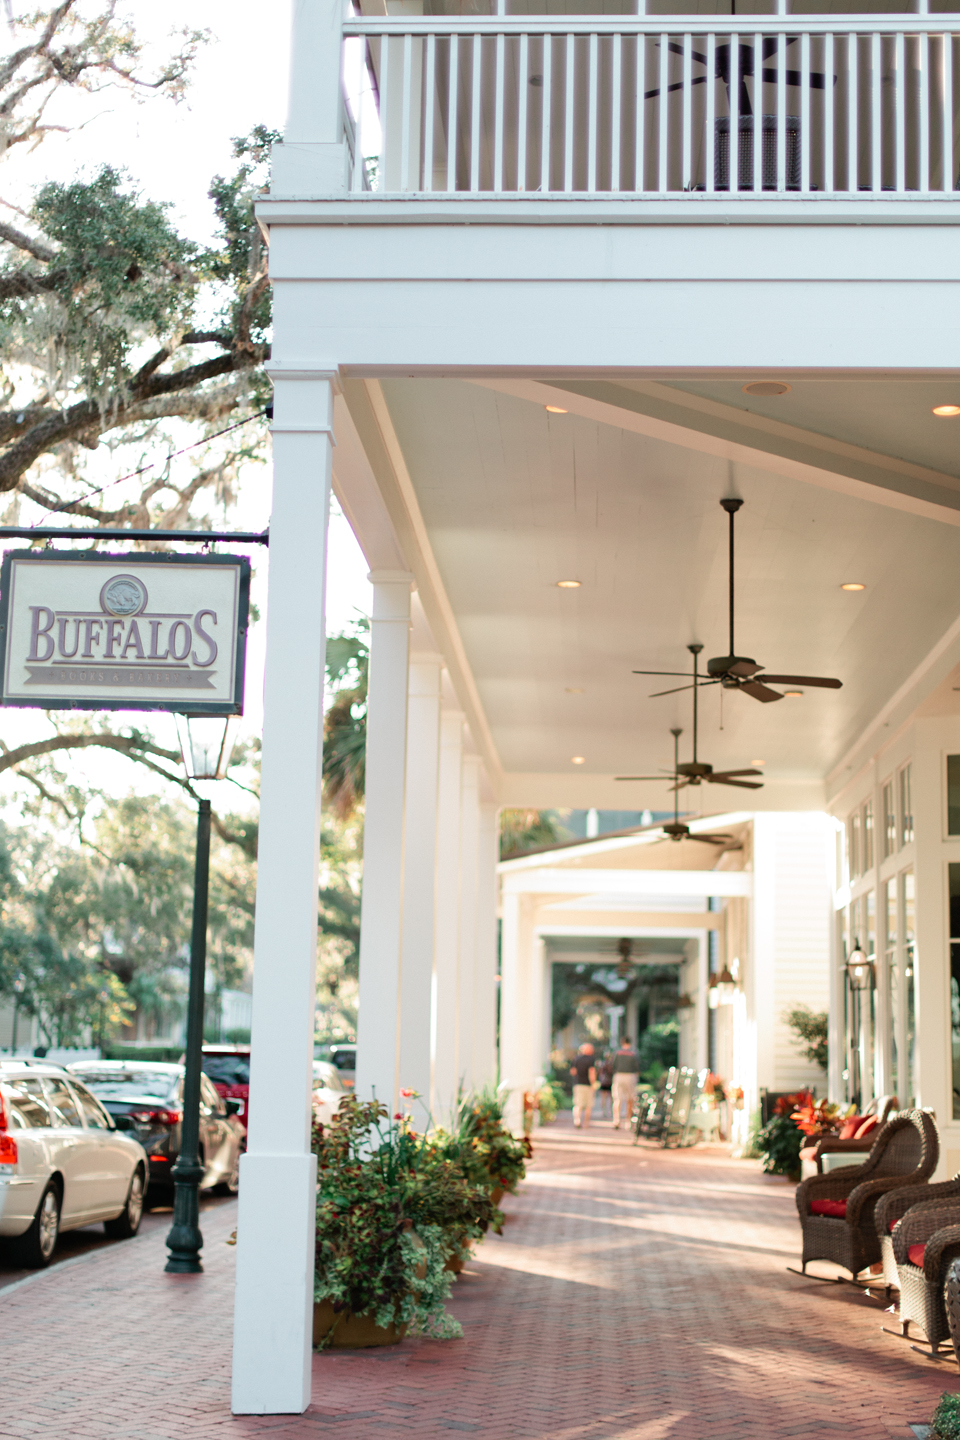 Image of a restaurant in Montage Palmetto Bluff in coastal South Carolina.  There are rocking chairs on the front porch and a sign that says, "Buffalo's".